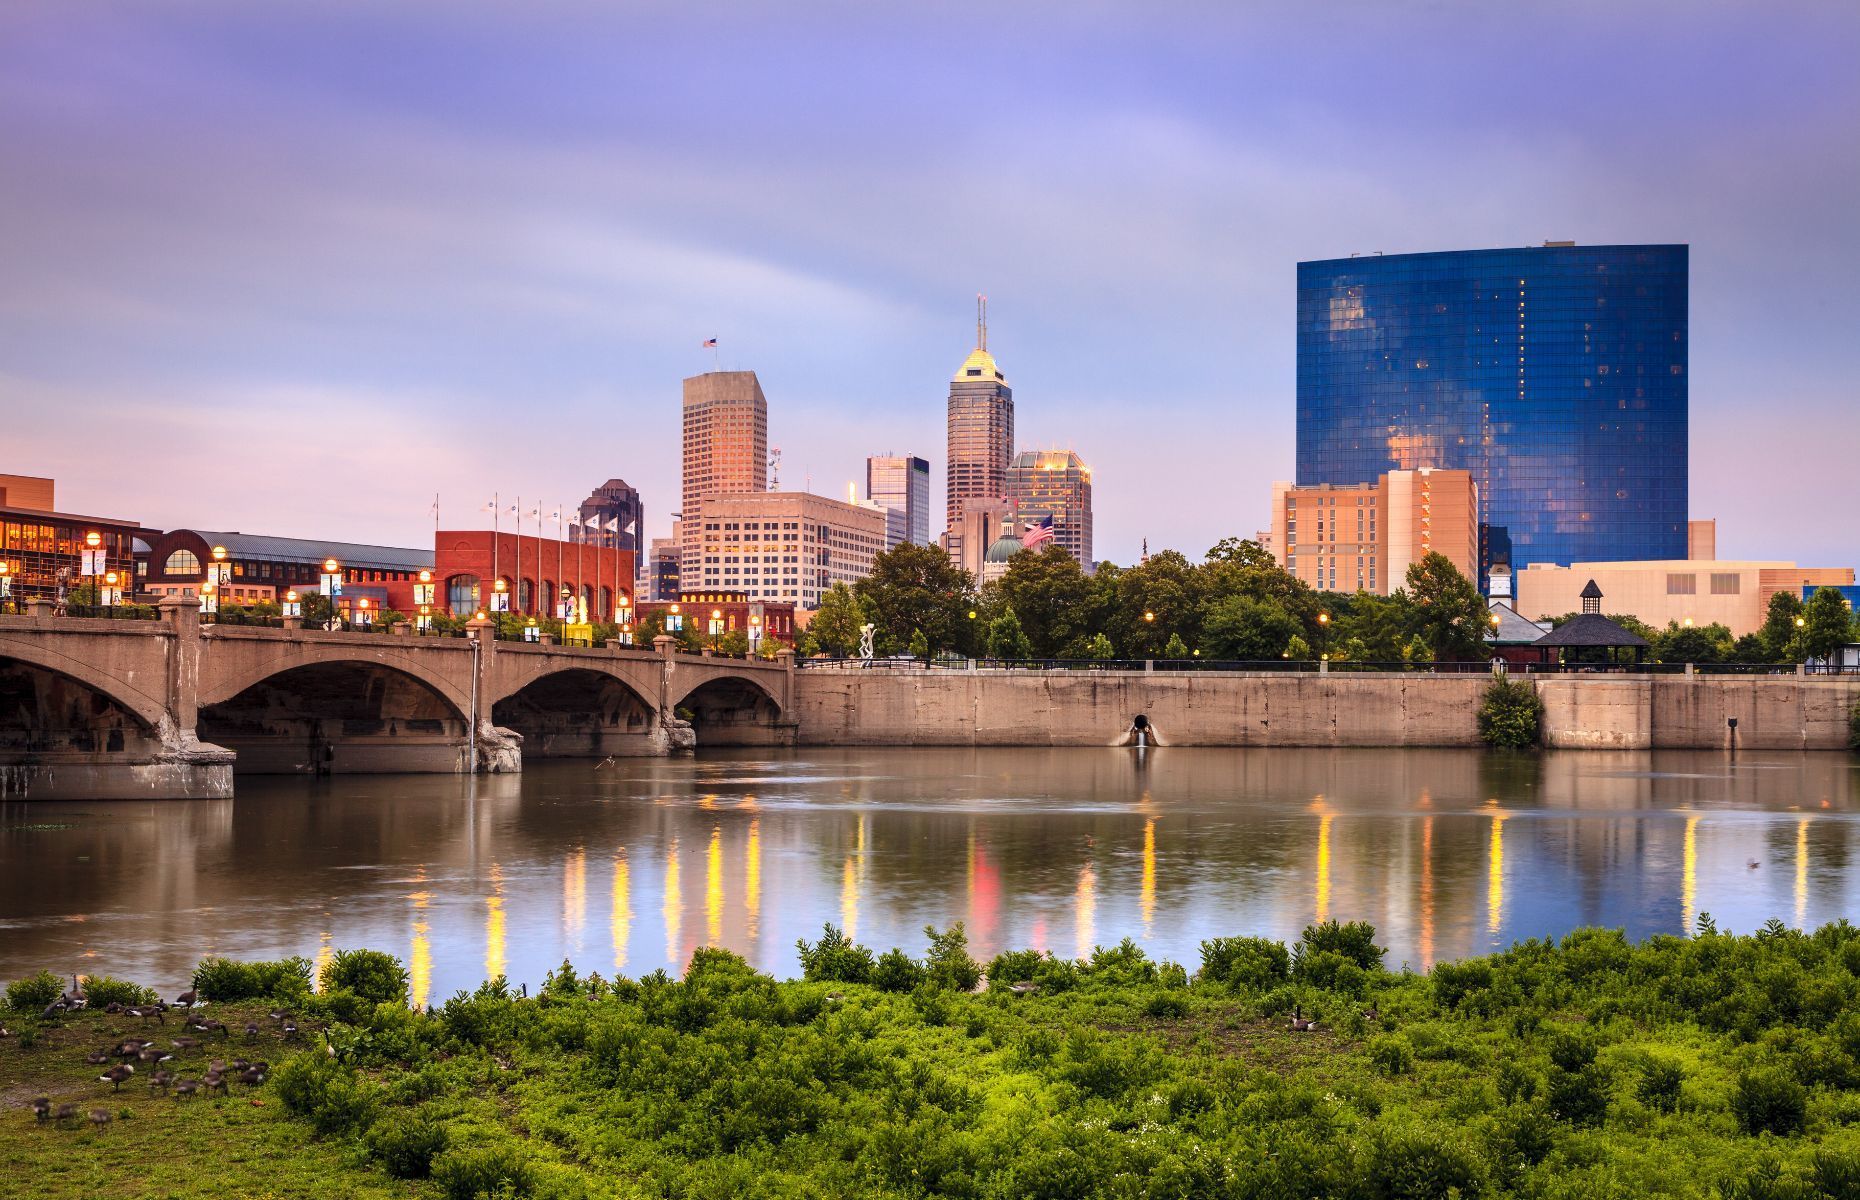 <p>Everyone knows about the great culinary scenes in places like New York and Los Angeles, but you may be surprised to learn that one of the best foodie cities in the US is none other than Indianapolis. Indiana’s capital is home to <a href="https://www.timeout.com/indianapolis/restaurants/best-restaurants-in-indianapolis" rel="noreferrer noopener">several James Beard-nominated restaurants</a>, including Tinker Street, the famous Bluebeard, and Milktooth, a renovated garage that serves only breakfast and lunch.</p>